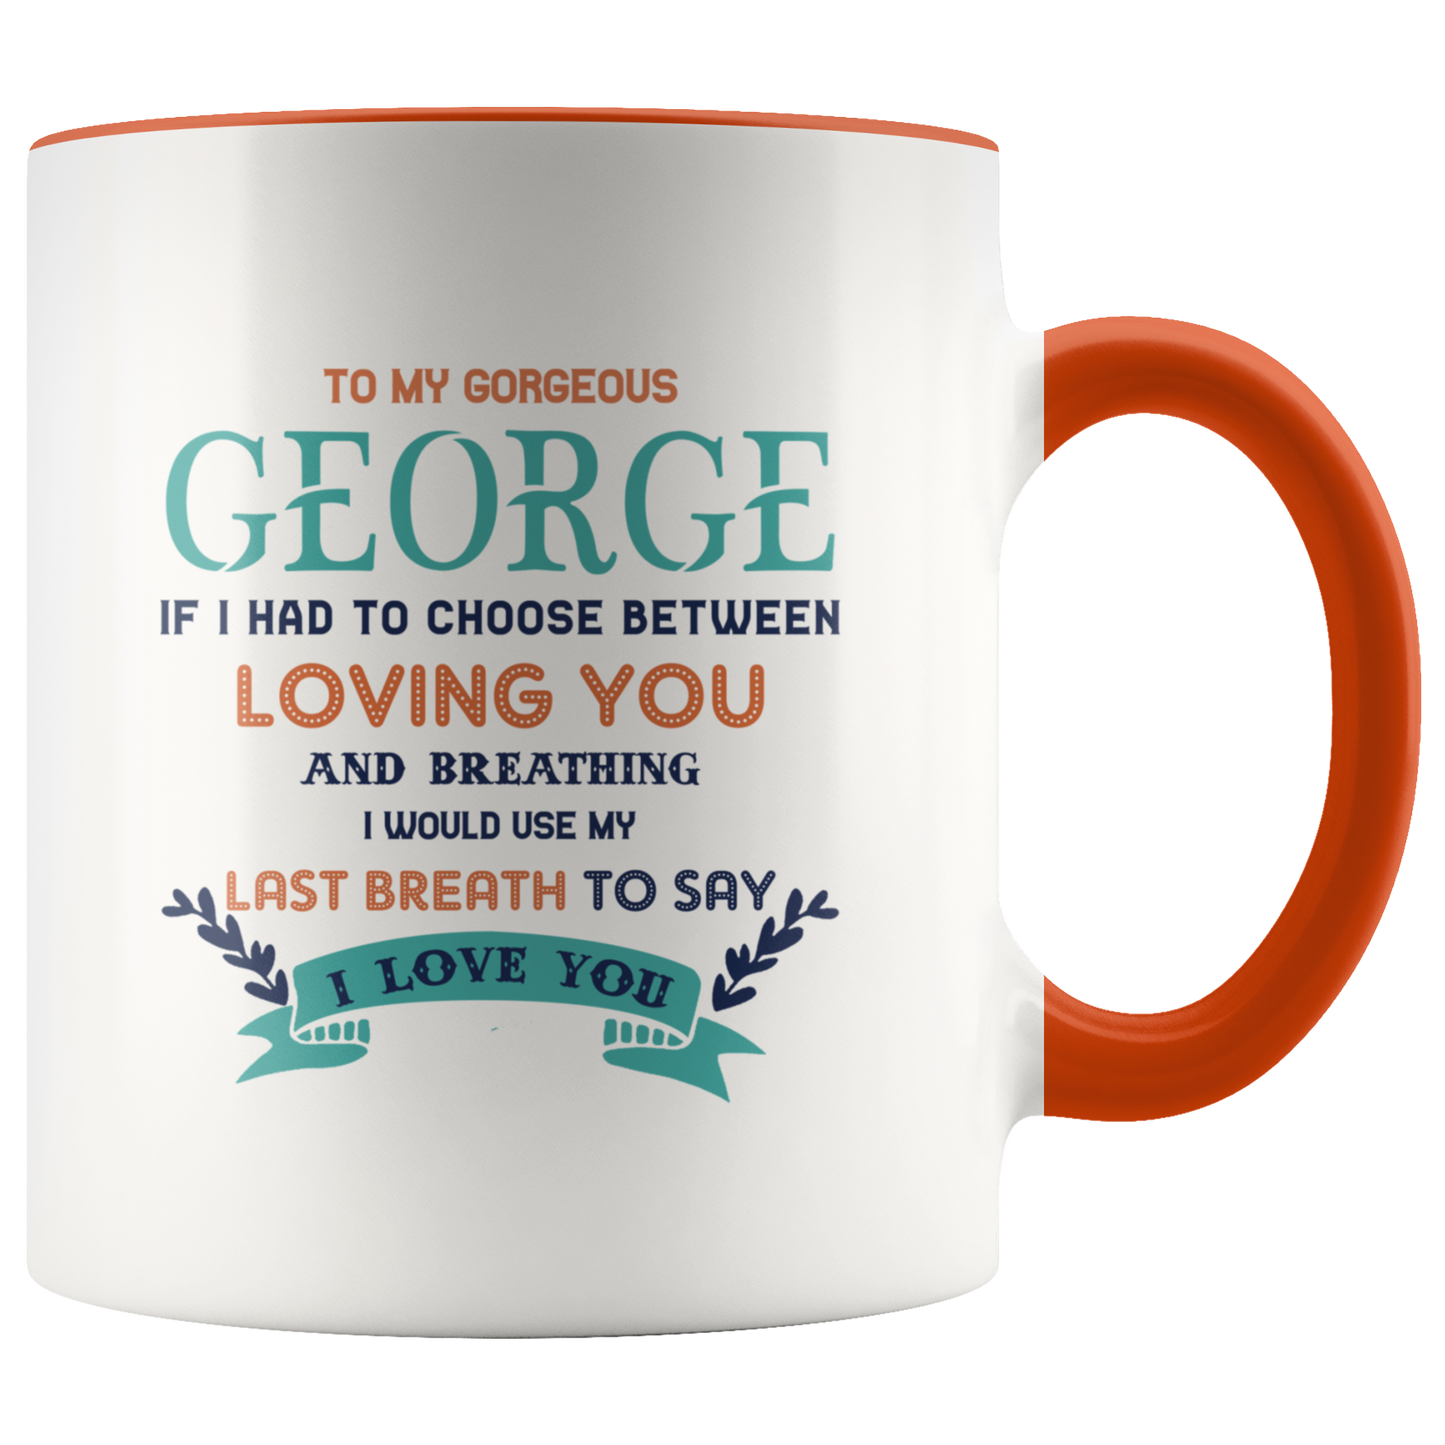 ND-21268160-sp-23352 - Valentines Day Gift For Him - To My Gorgeous George If I Had